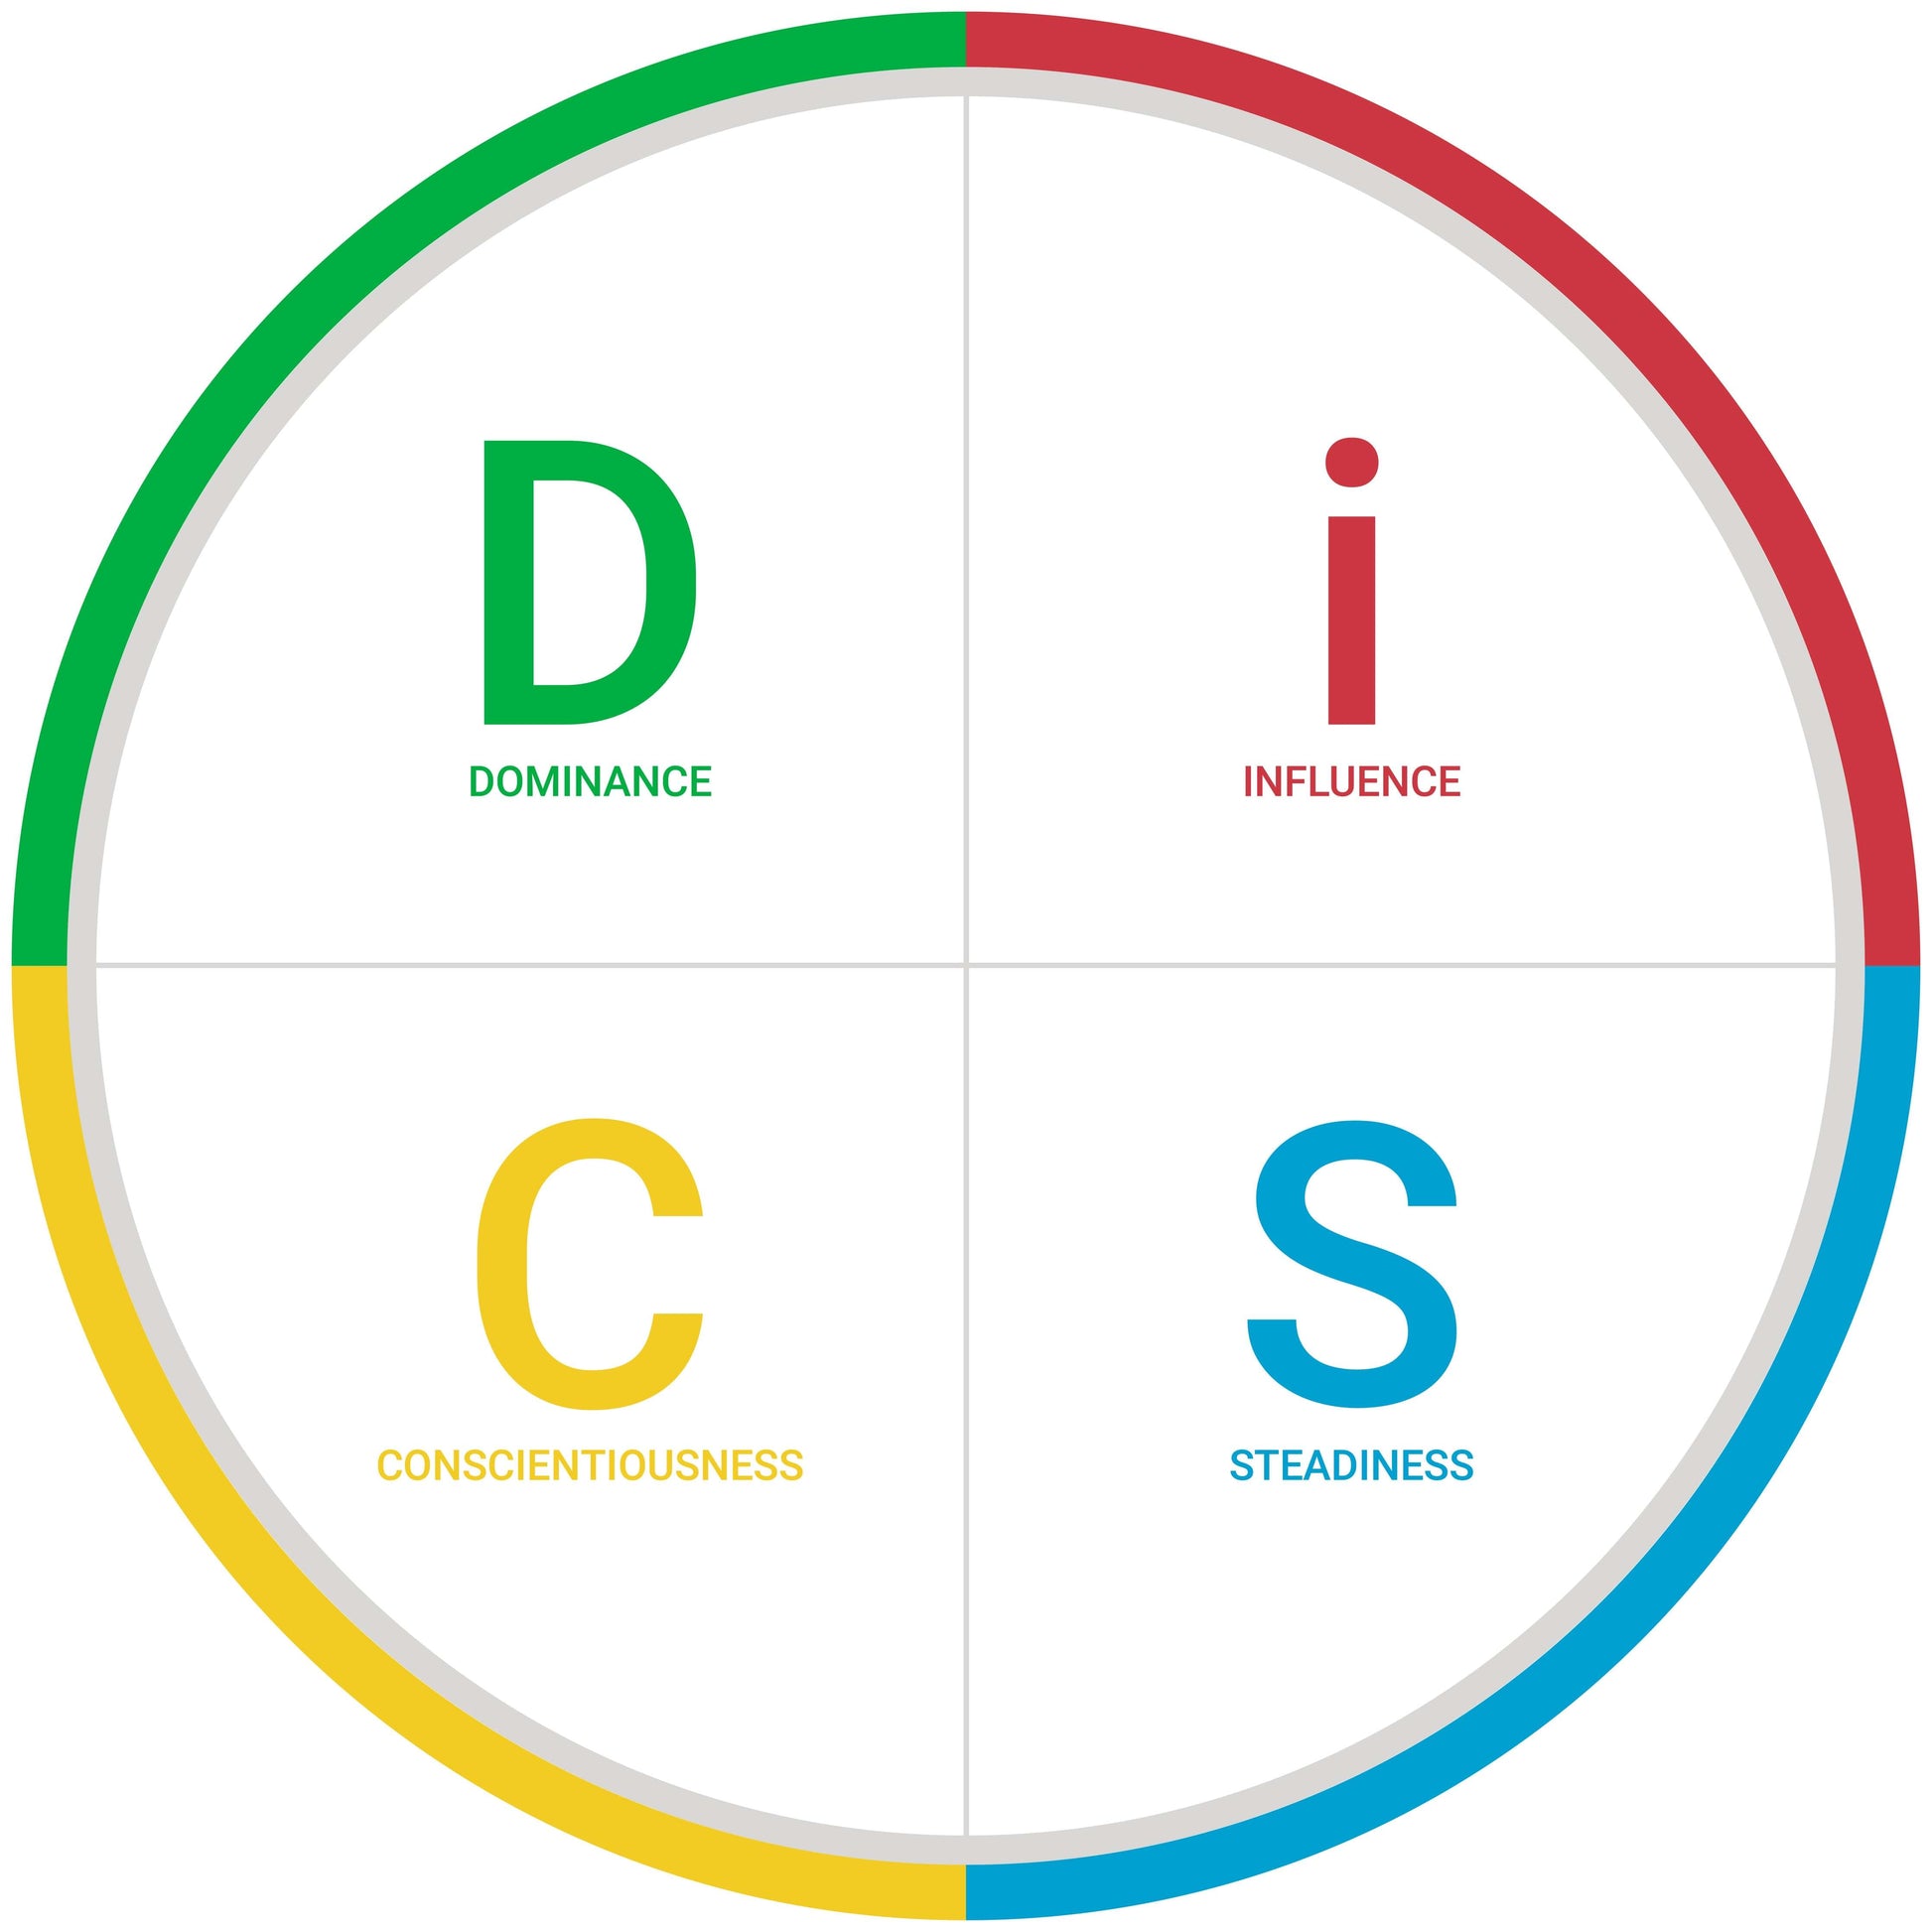 Powered by 40+ years of research, each Everything DiSC personality assessment combines adaptive testing and sophisticated algorithms 